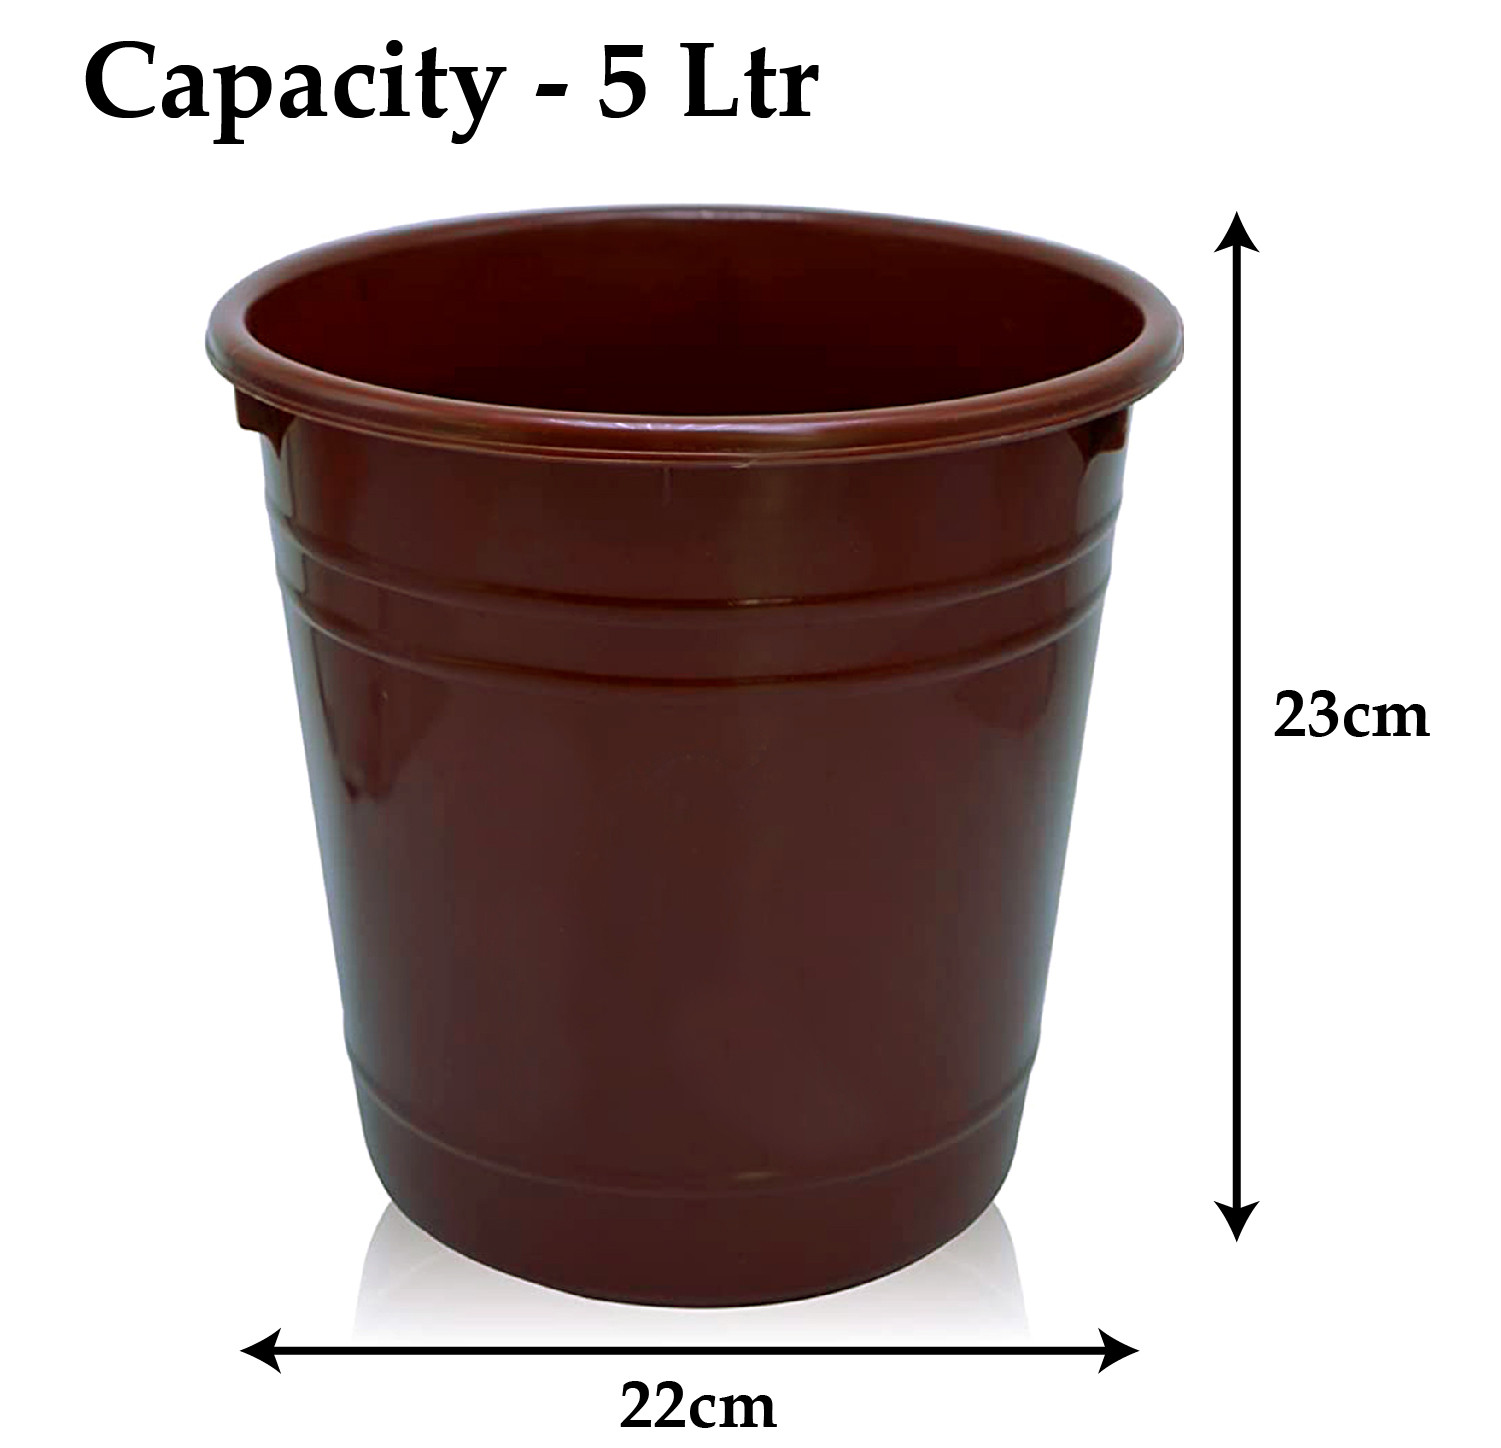 Kuber Industries Plastic Dustbin|Portable Garbage Basket & Round Trash Can for Home,Kitchen,Office,College,5 Ltr.(Brown)